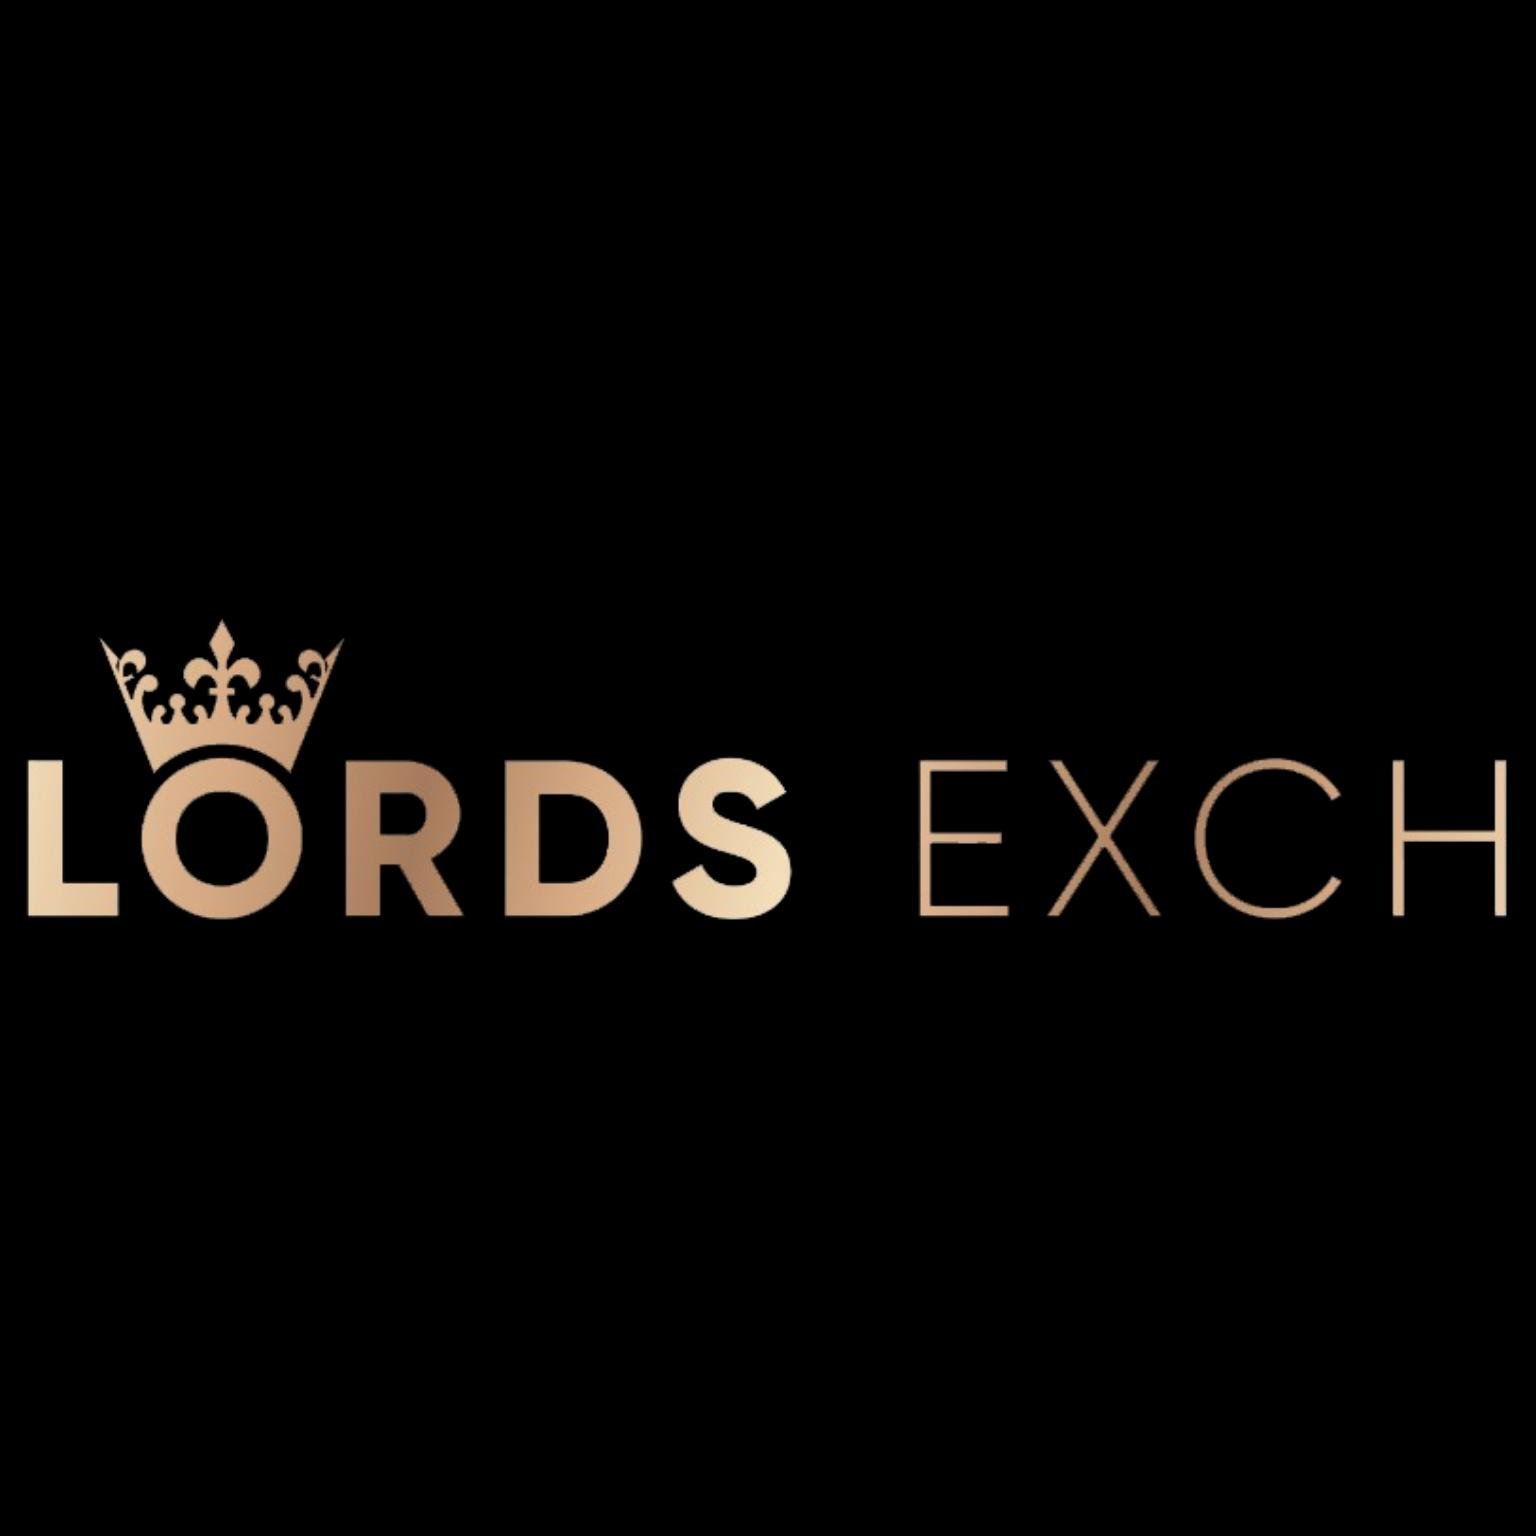 Lords Exchange ID